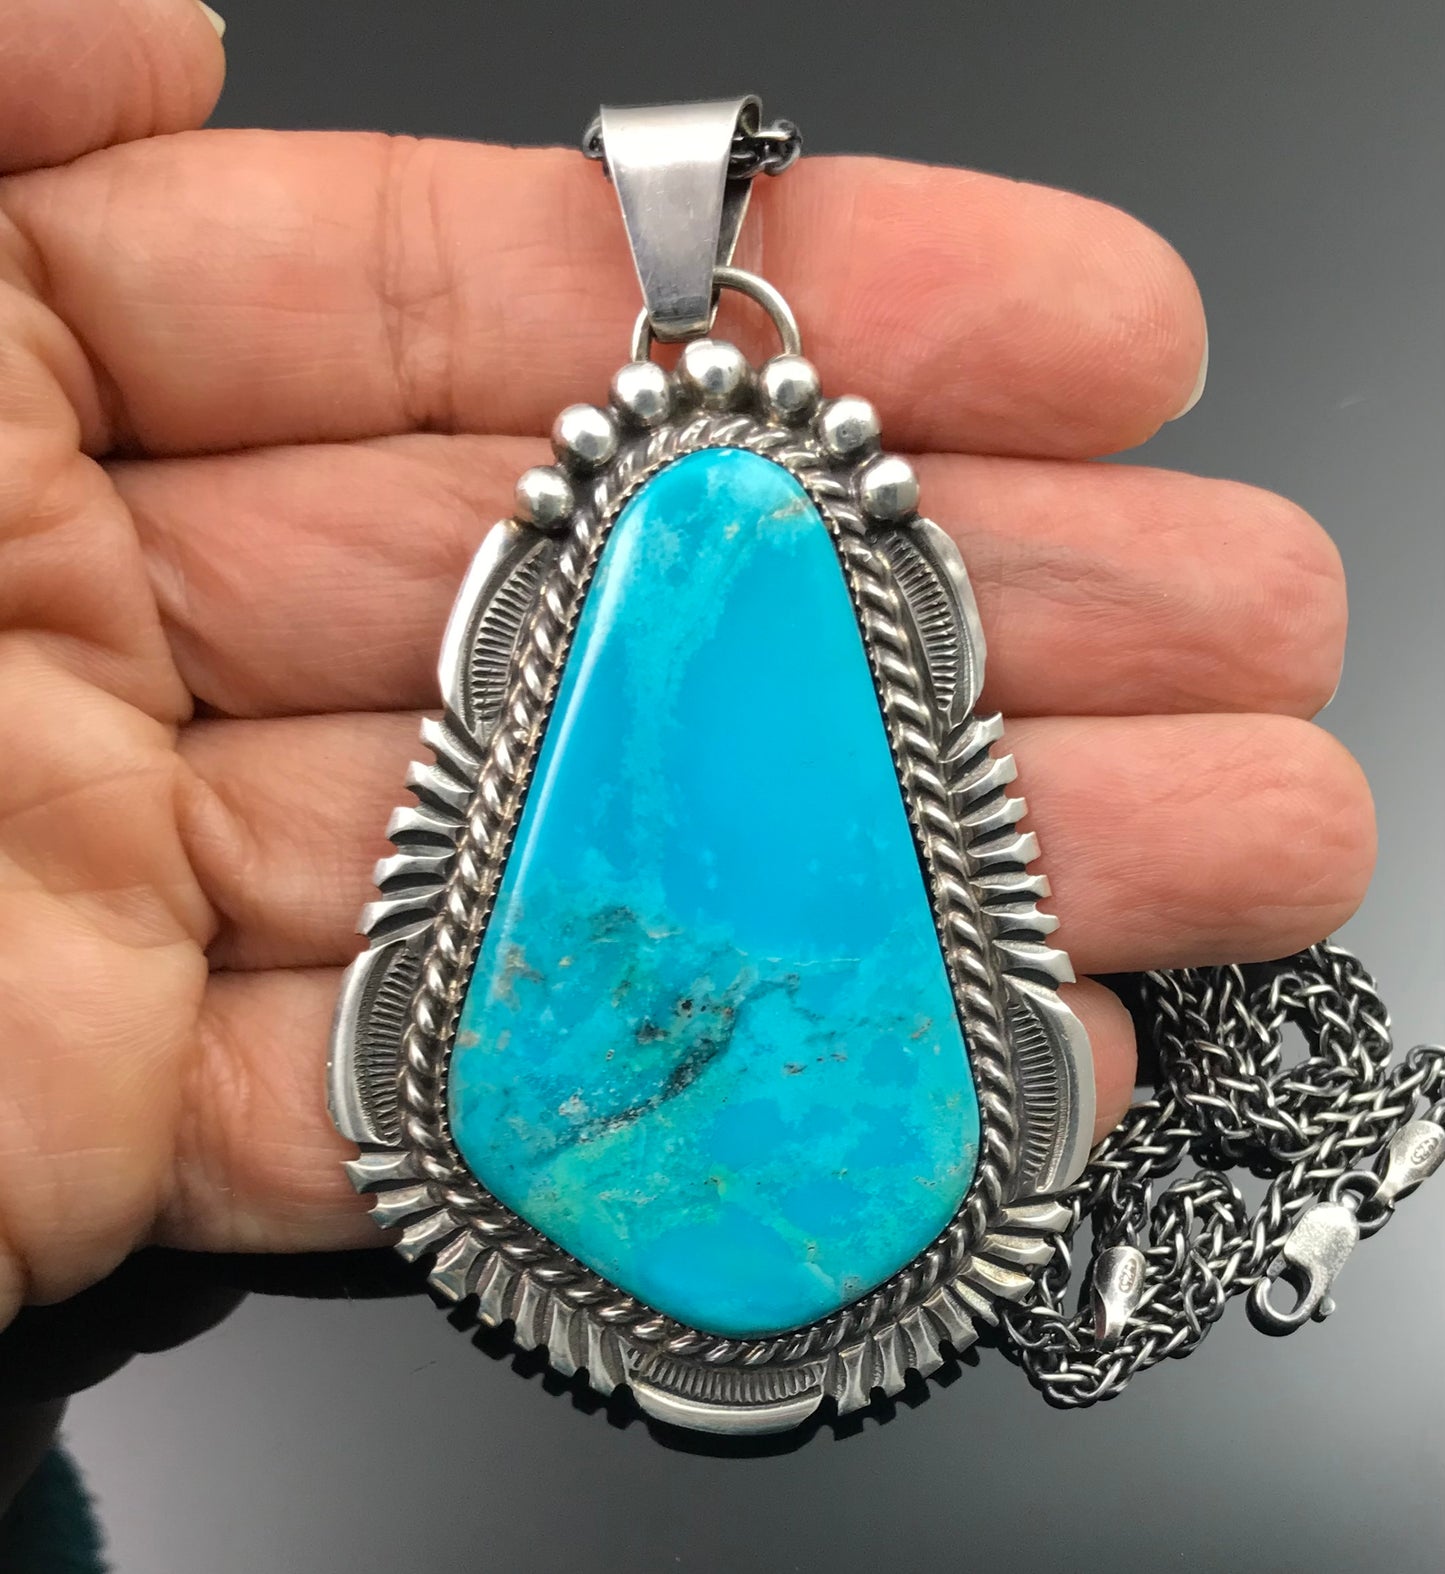 Large Turquoise Navajo Necklace Pendant Native American Sterling Silver - Alvin Joe